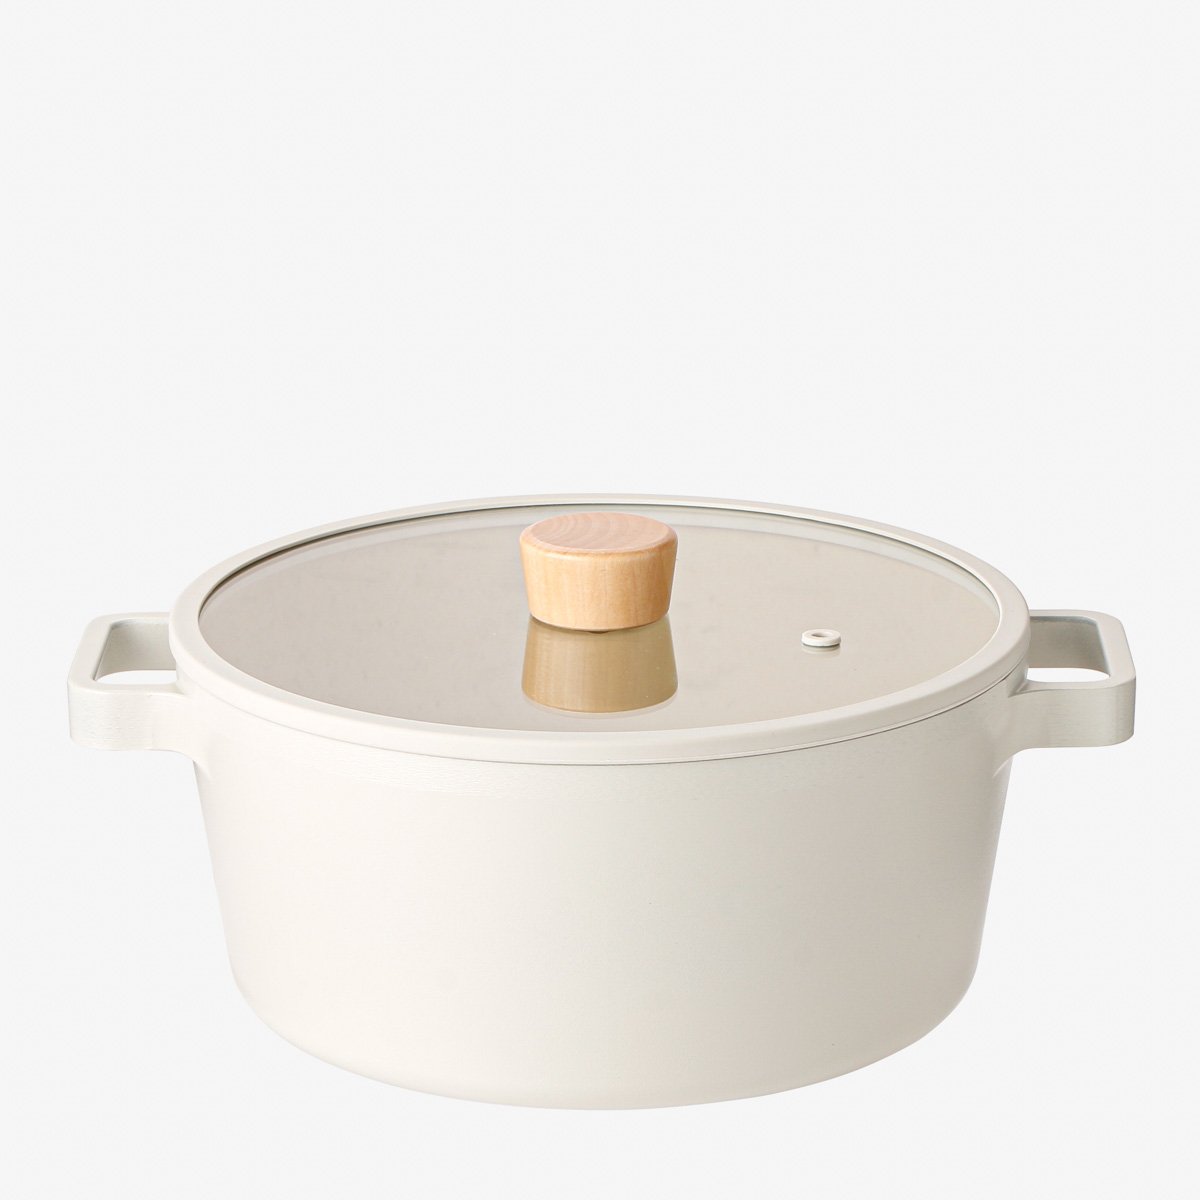 Neoflam Vulcan 4QT (24cm) Stock Pot with Glass Lid | Nonstick T-Coating |  Made in Korea